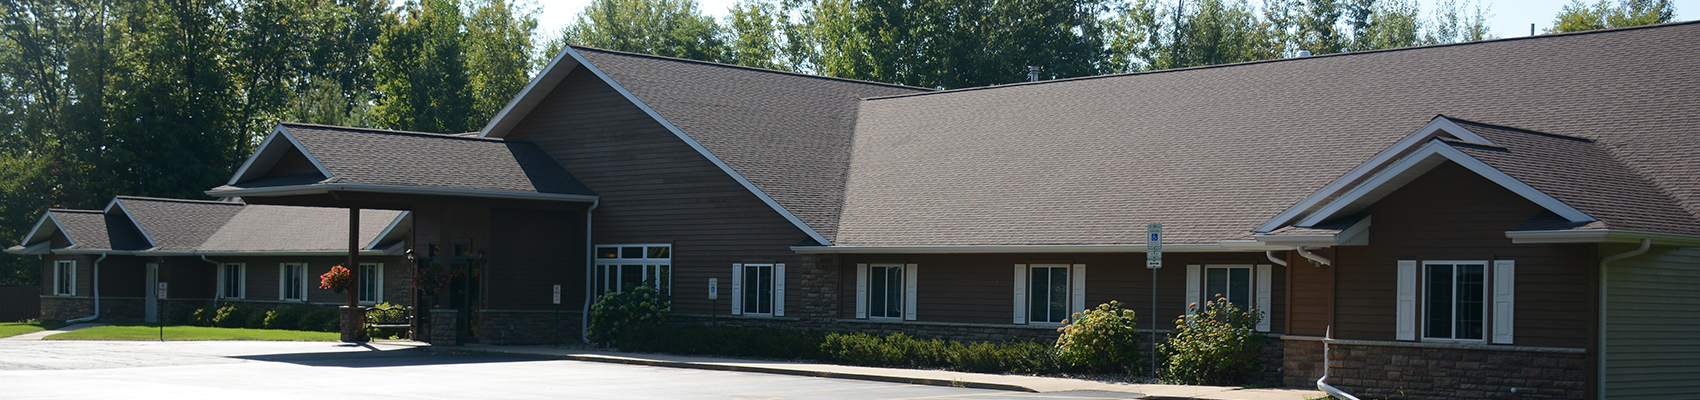 North Ridge Assisted Living in Stevens Point, WI